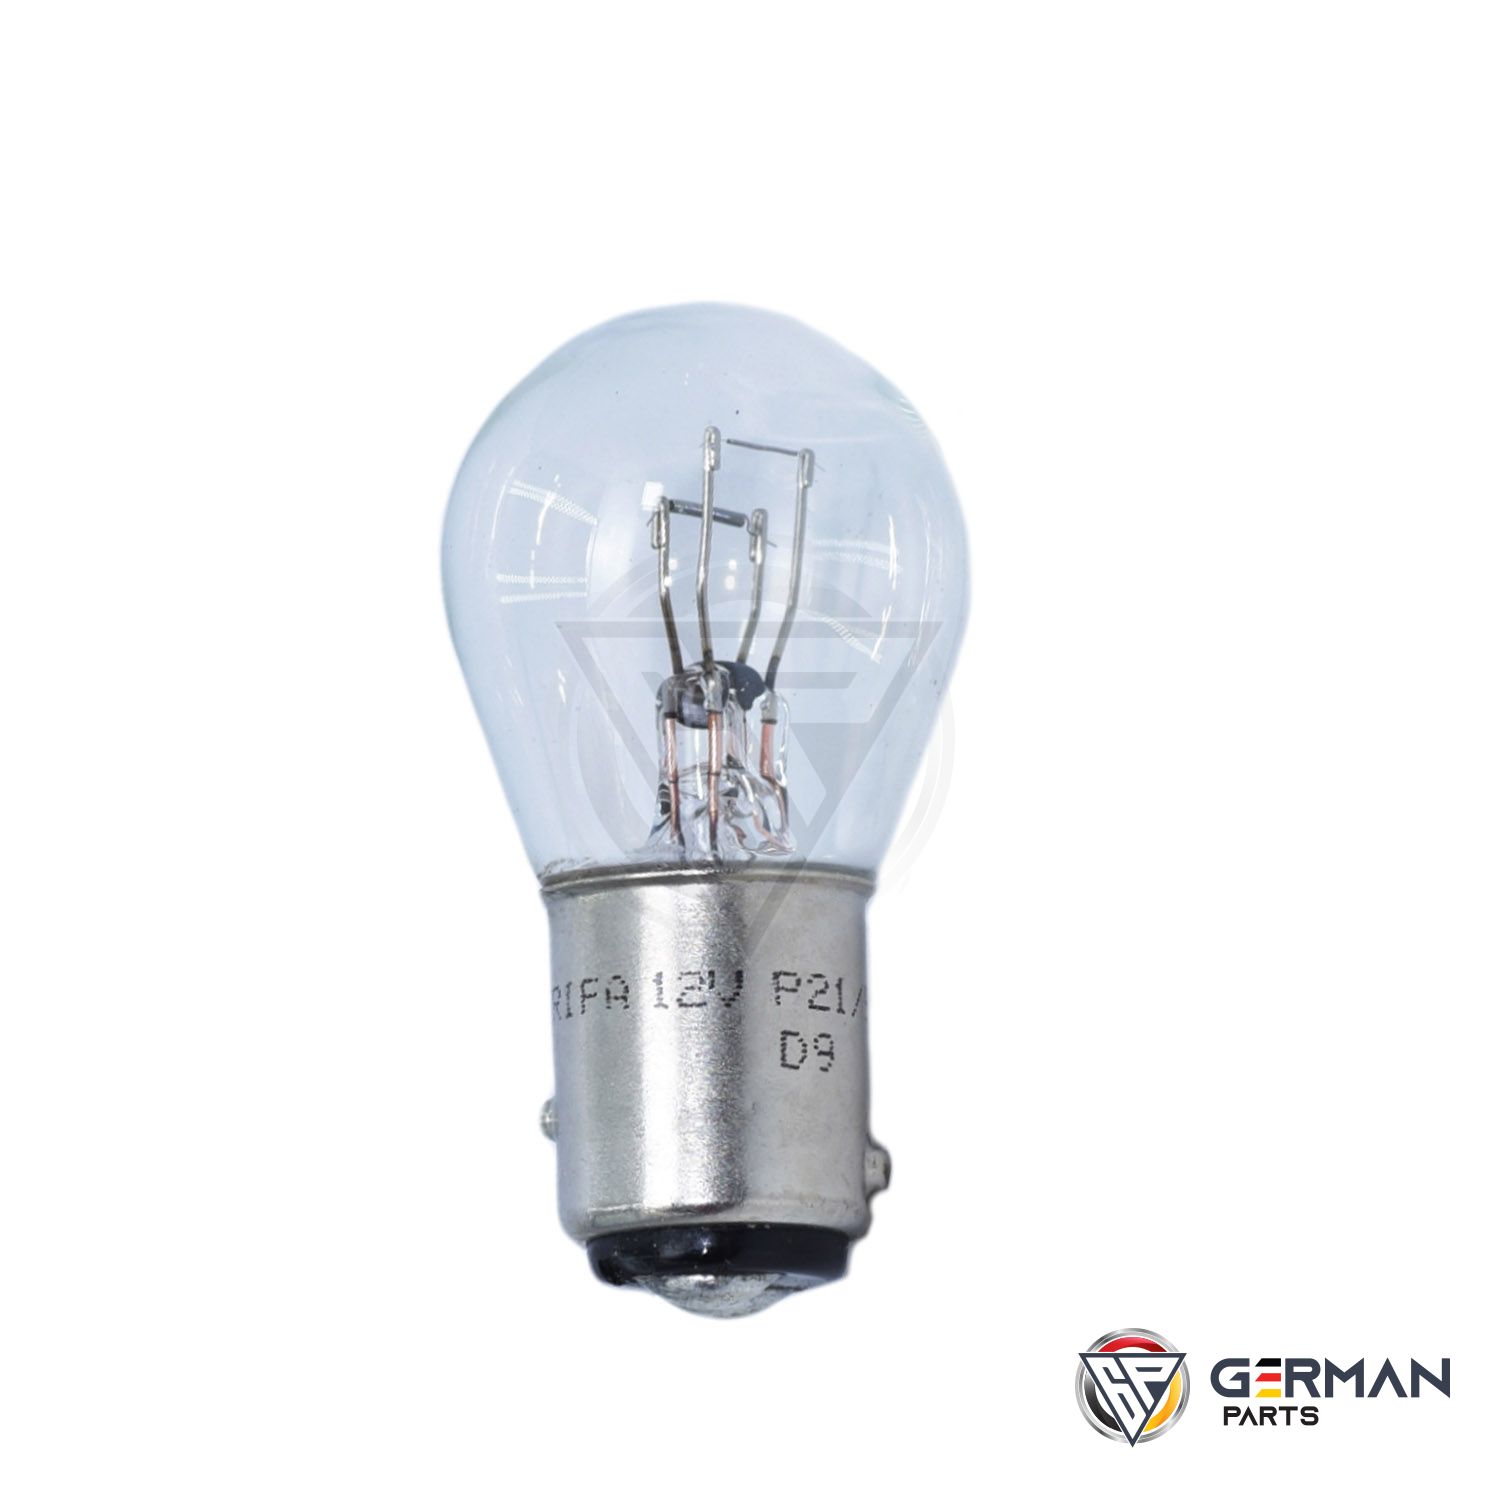 https://germanparts.ae/images/products/large/7528TA/trifa-bulb-double-filament-p21-5w-12v-7528-7528TA.jpg